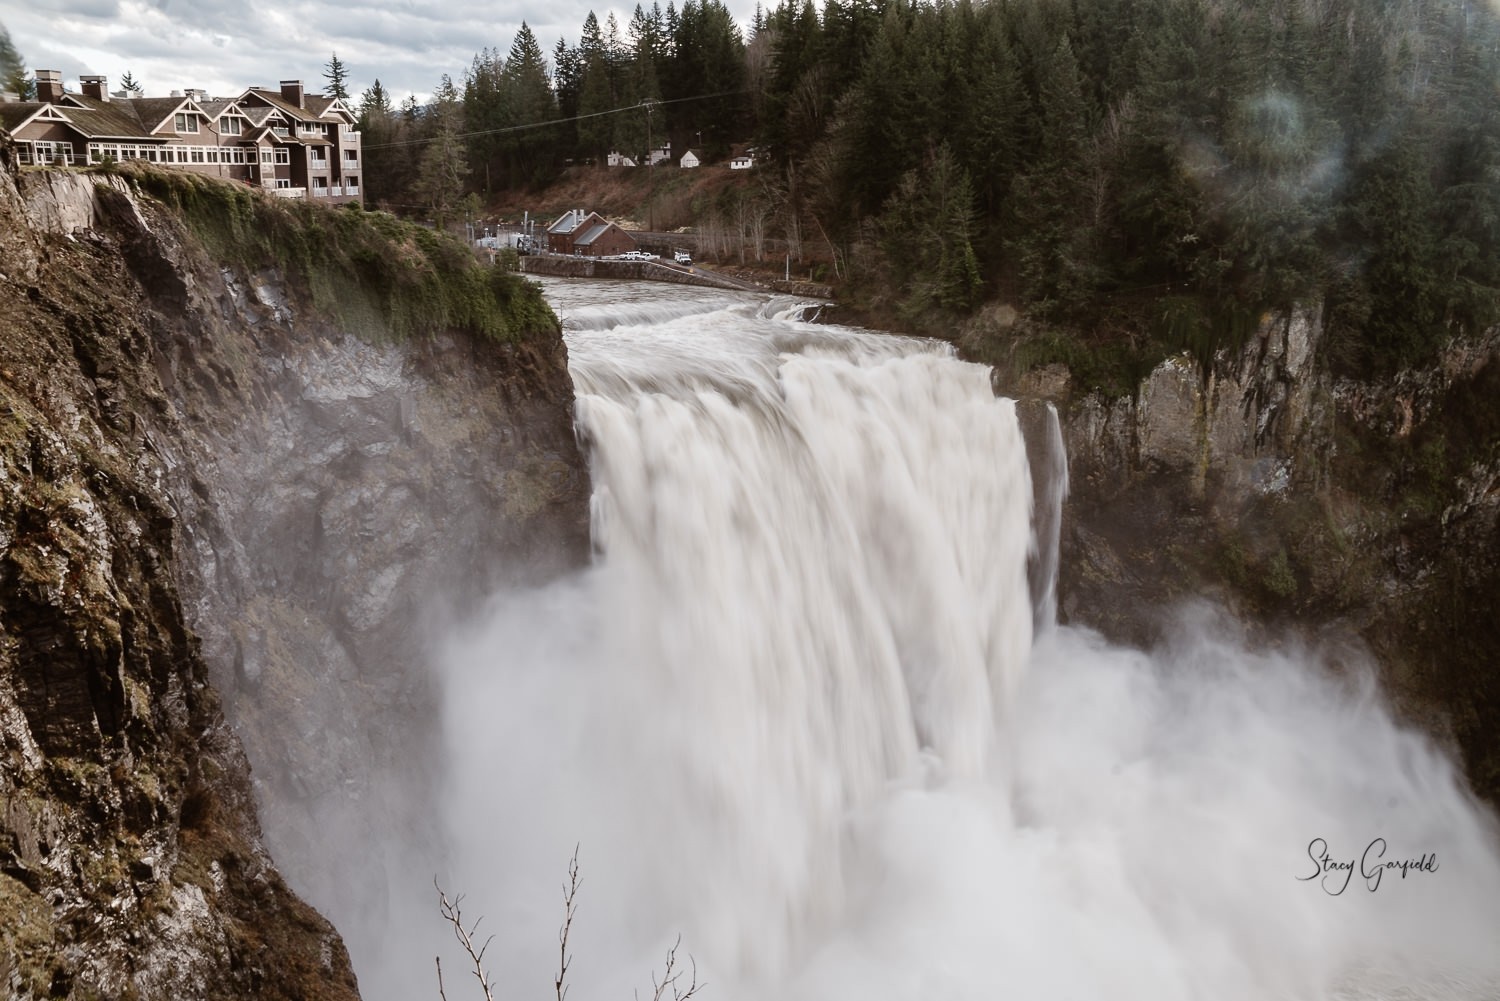 Snoqualmie Valley Elopement Photographer, Salish Lodge and snoqualmie falls in full force, this is a beautiful place to elope in Snoqualmie